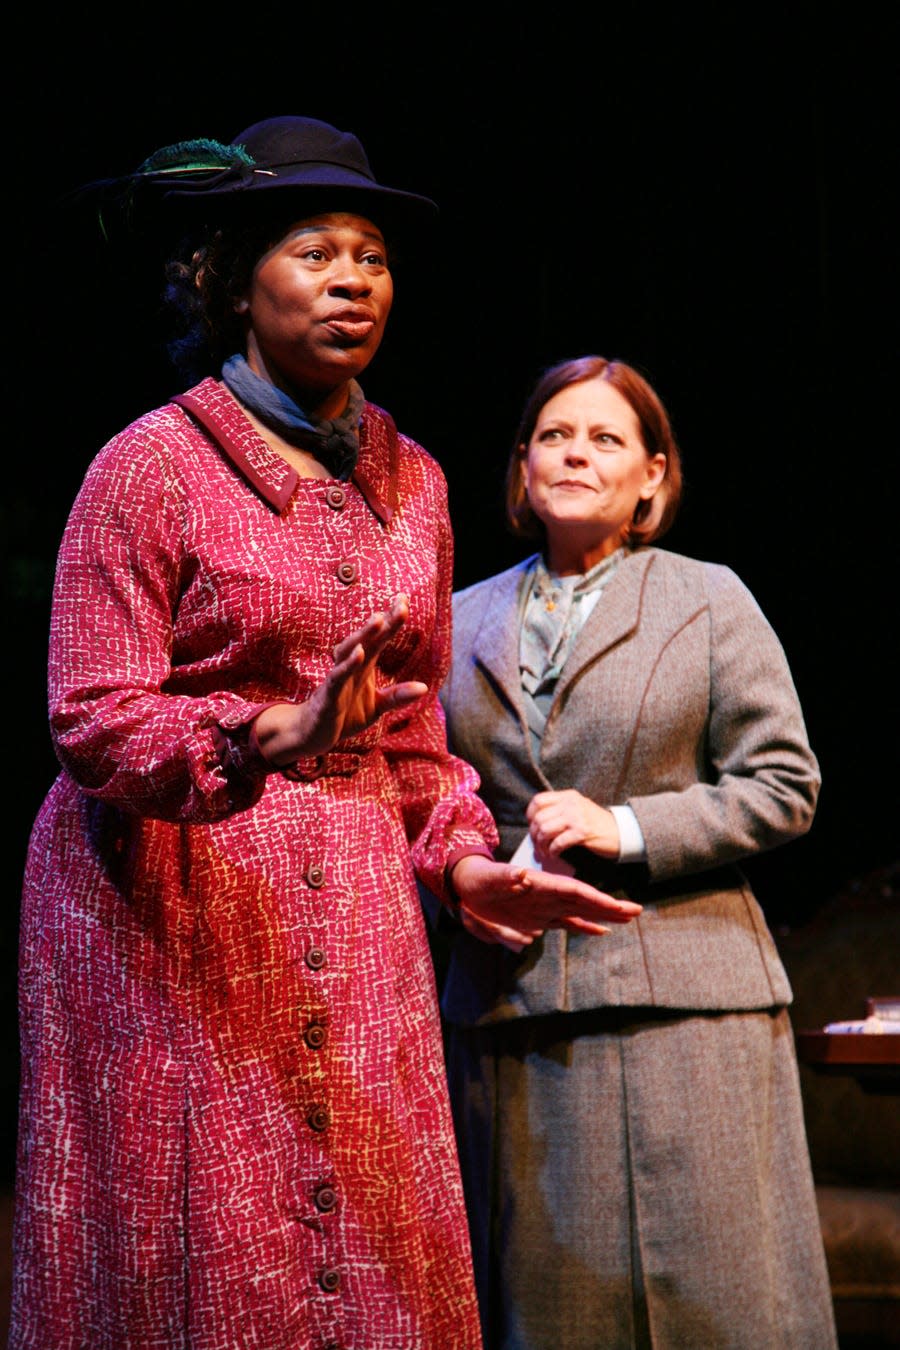 Alice M. Gatling, left, with Forrest Richards, in the 2009 production of Frank Higgins’ play “Black Pearl Sings.” Gatling returns to the role this summer.